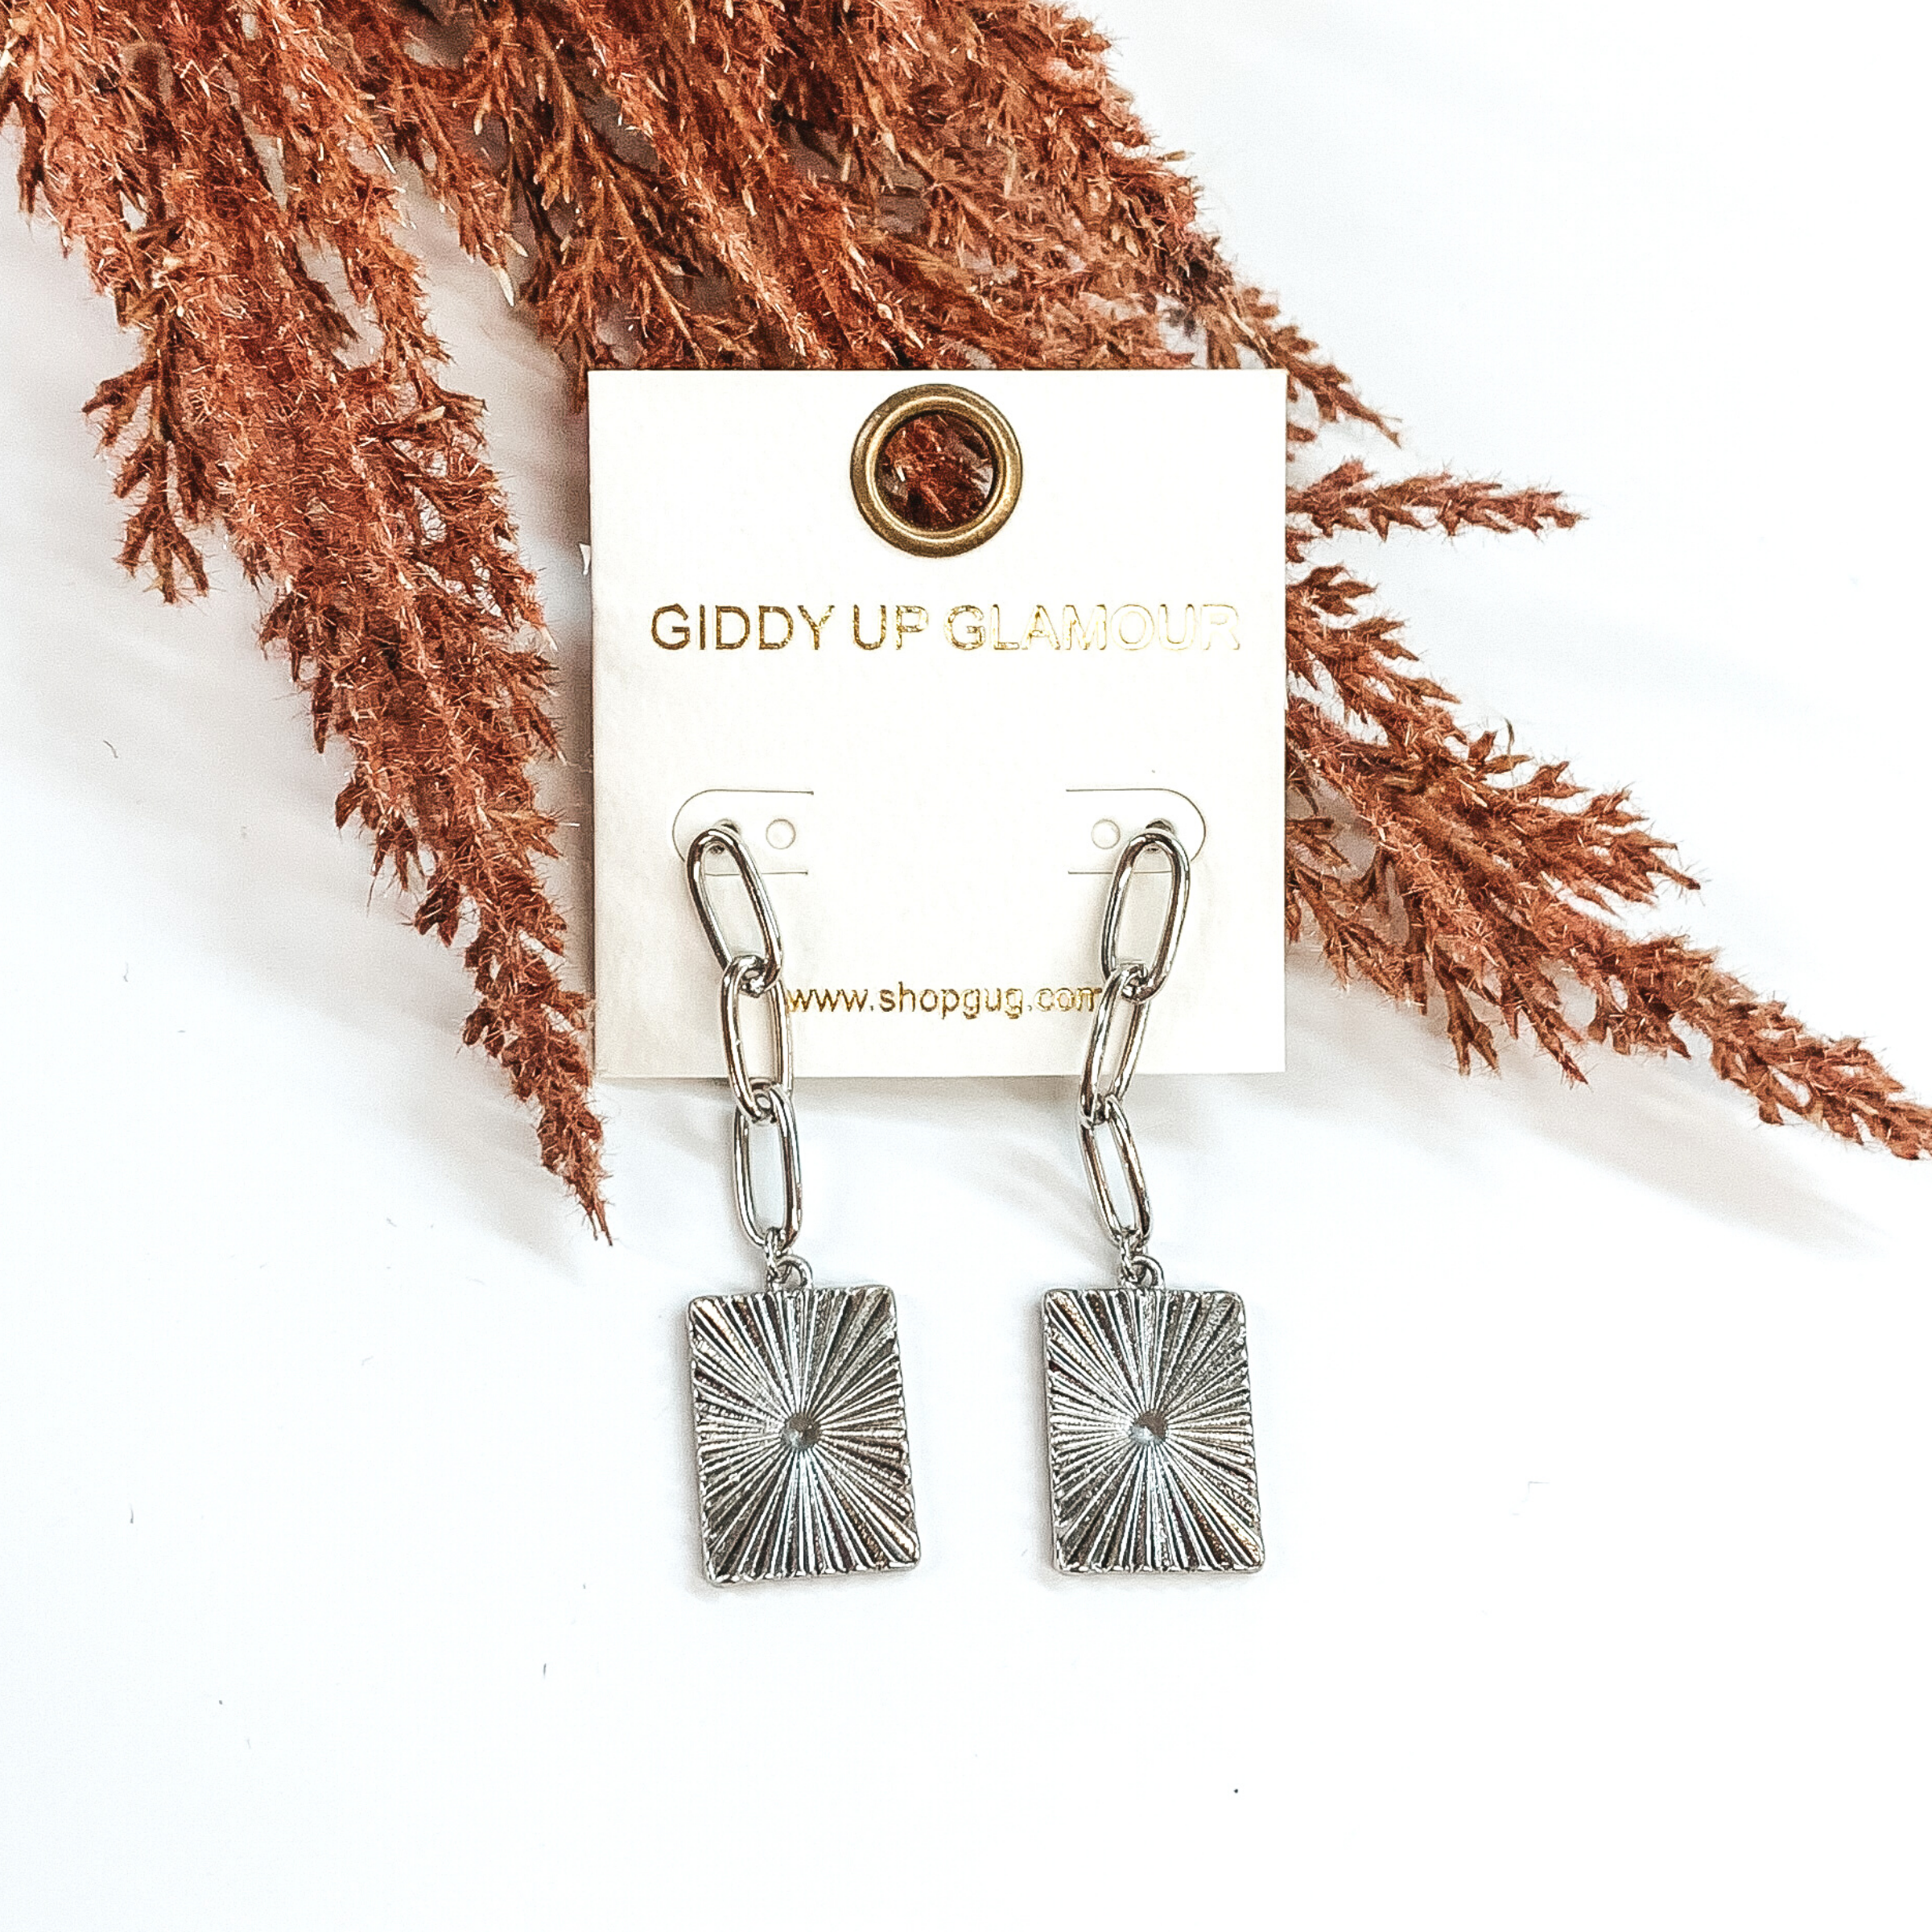 These are silver, chained, dangle earrings with a hanging rectangle pendant. The pendant has a starburst design. These earrings on partially laid on some brown floral on a white background. 